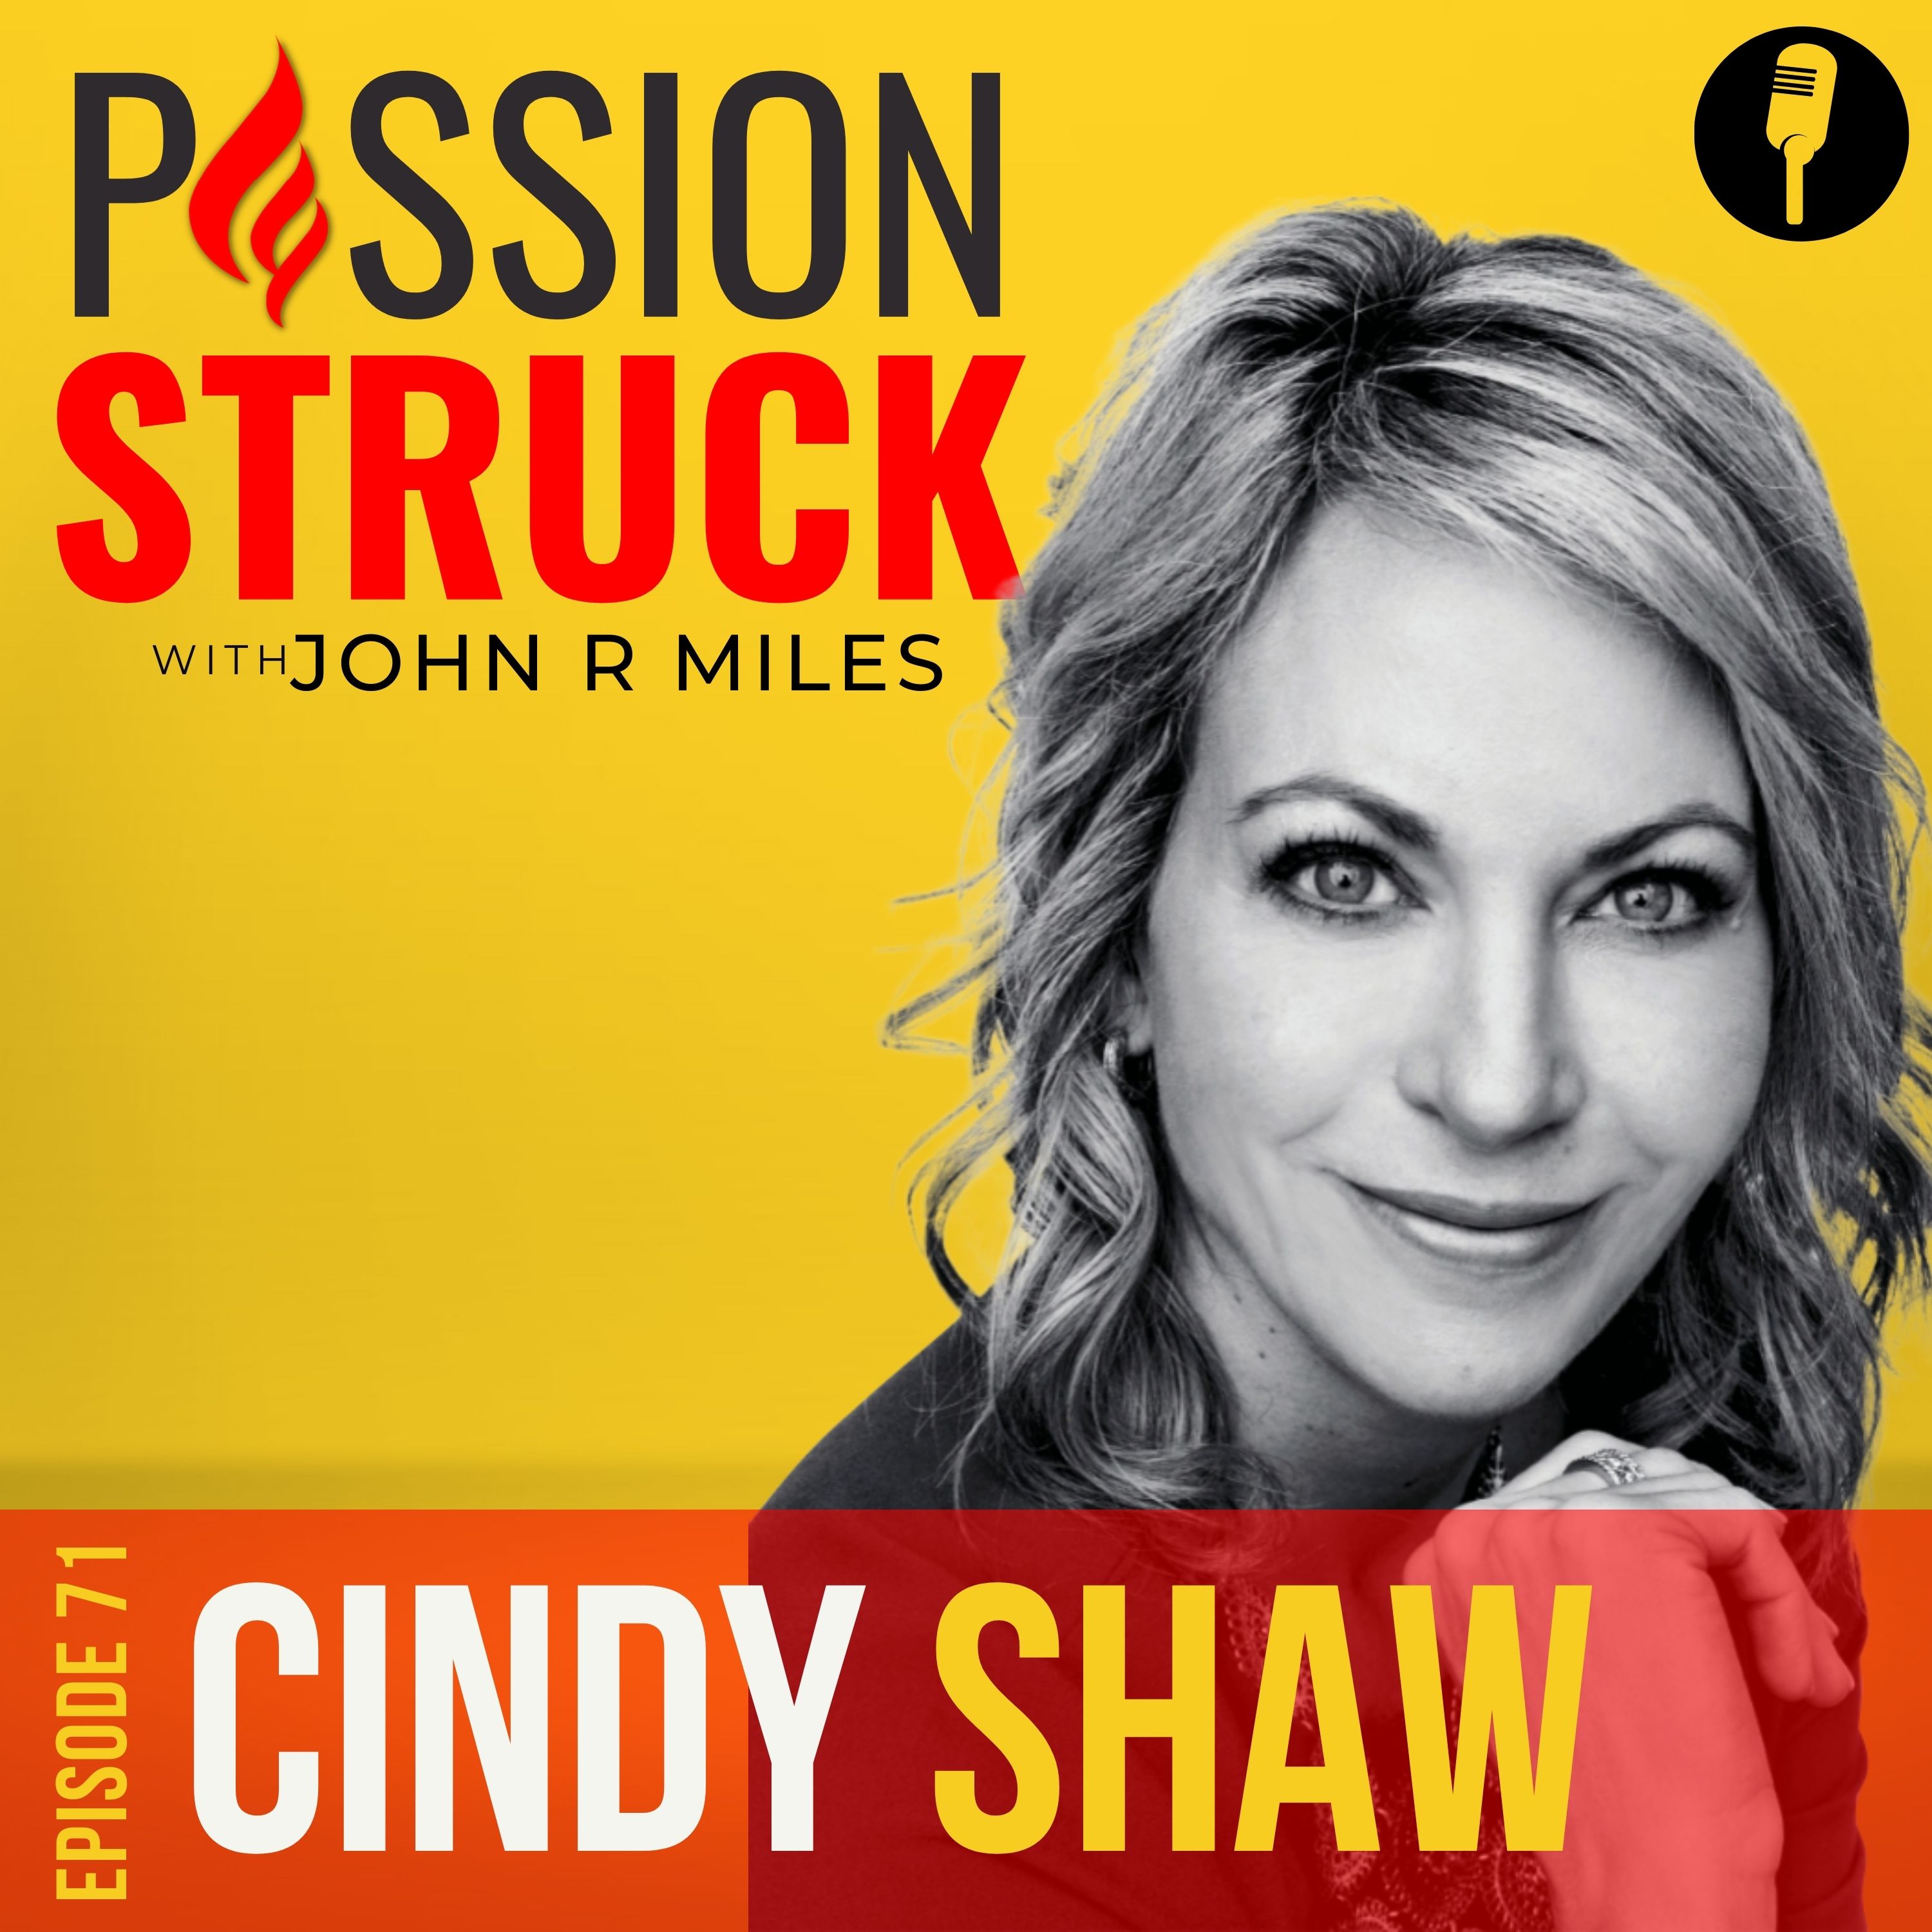 Passion Struck Podcast Album for Episode 71 featuring Cindy Shaw